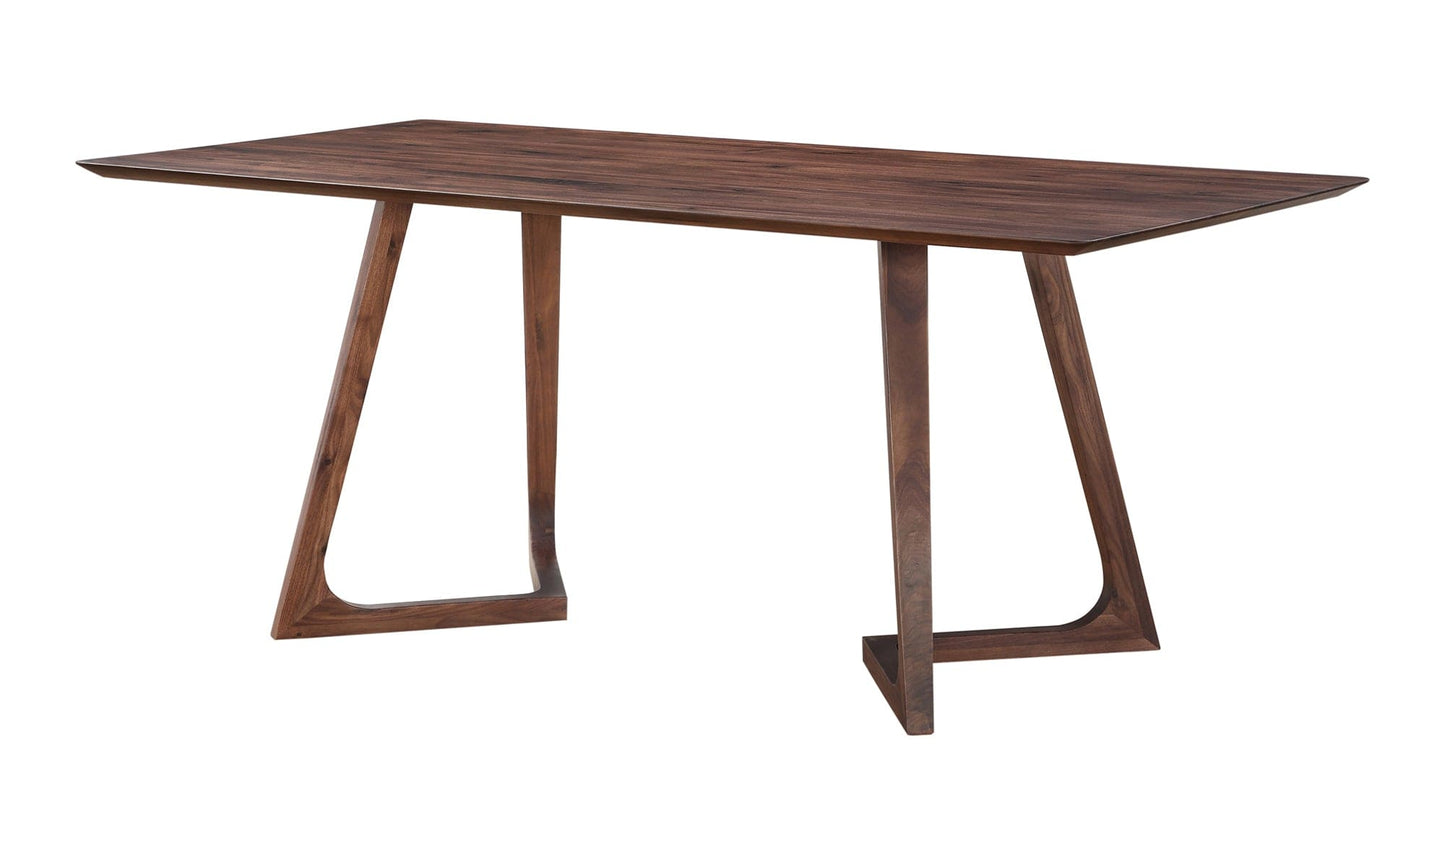 Moe's Solid Walnut Wood GODENZA DINING TABLE RECTANGULAR